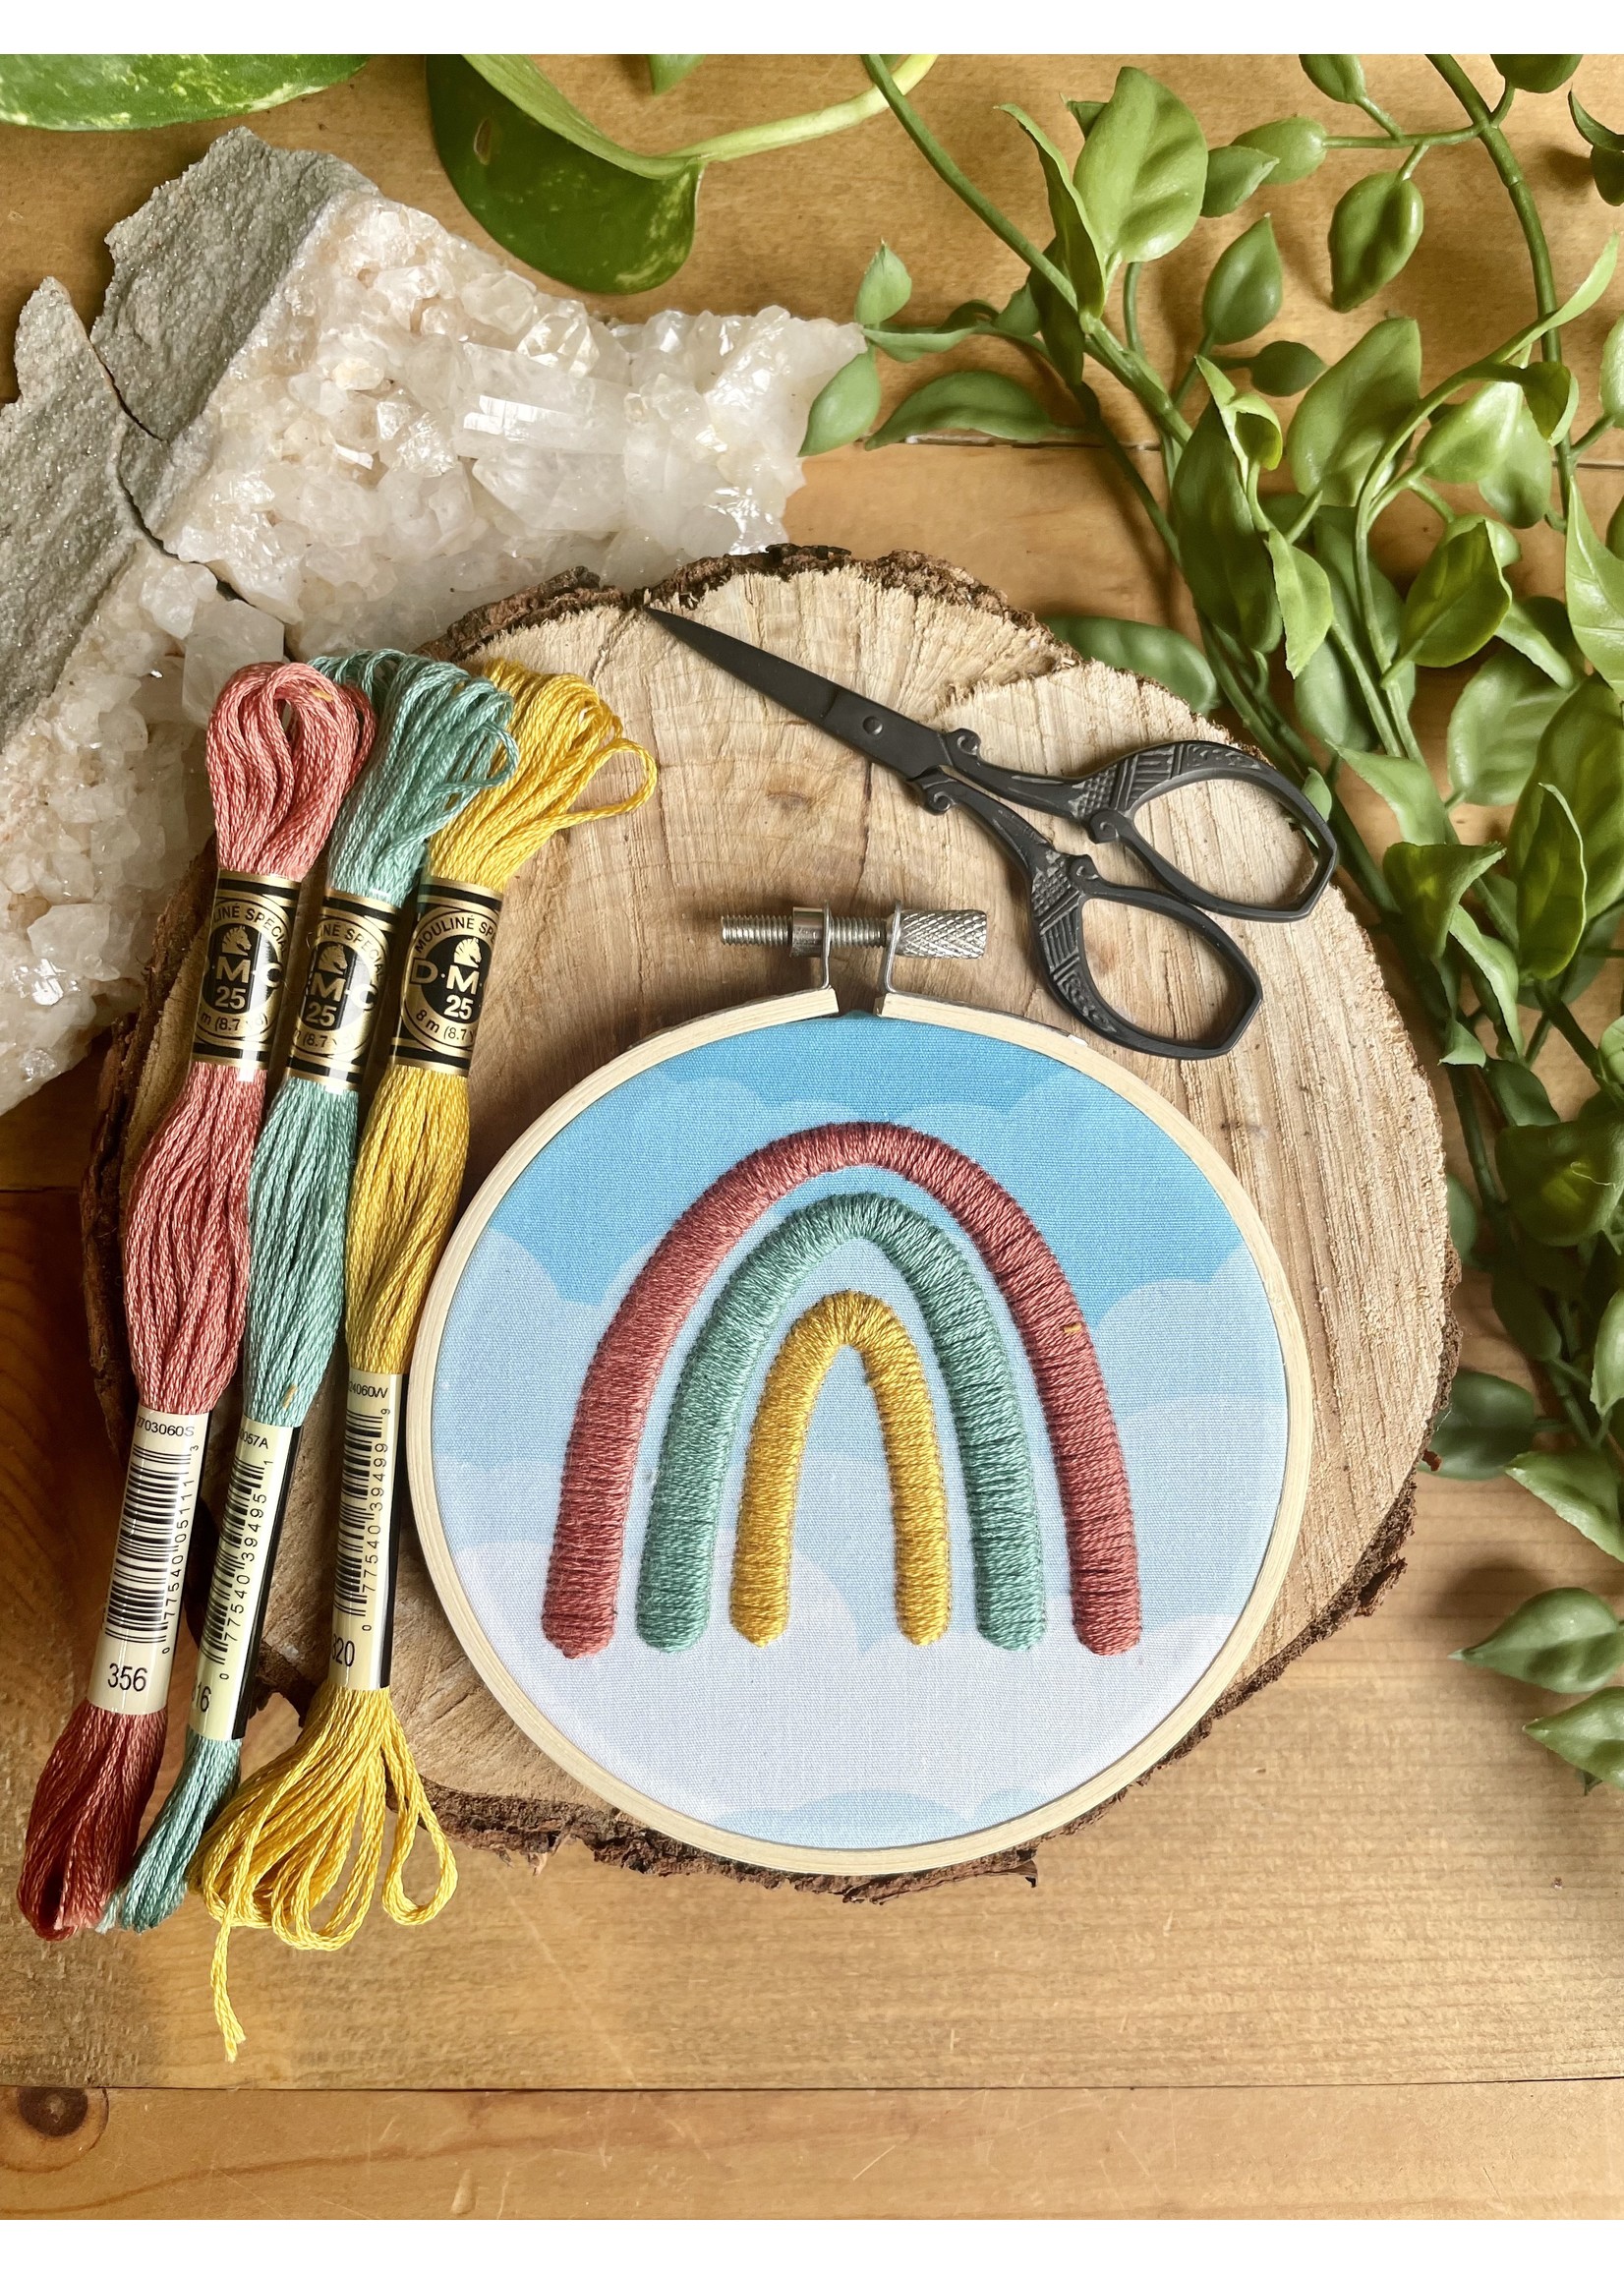 Rainbow Embroidery Kit for Kids, First Cross Stitch Project, DIY Knitting  Kit for Beginners 